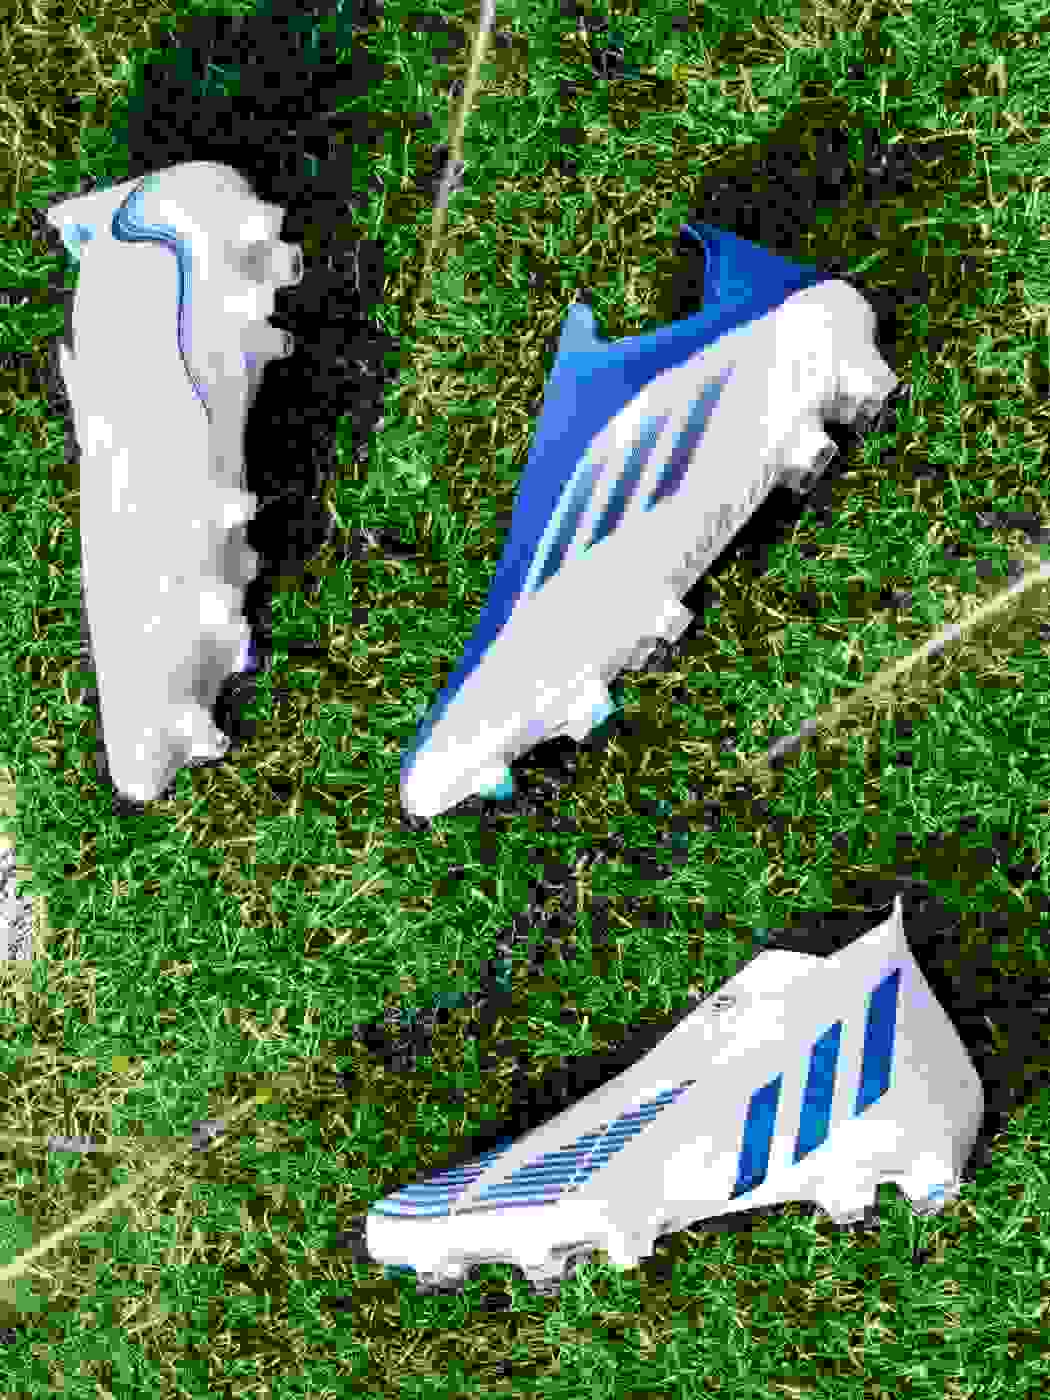 Image of the COPA, X and Predator on grass.